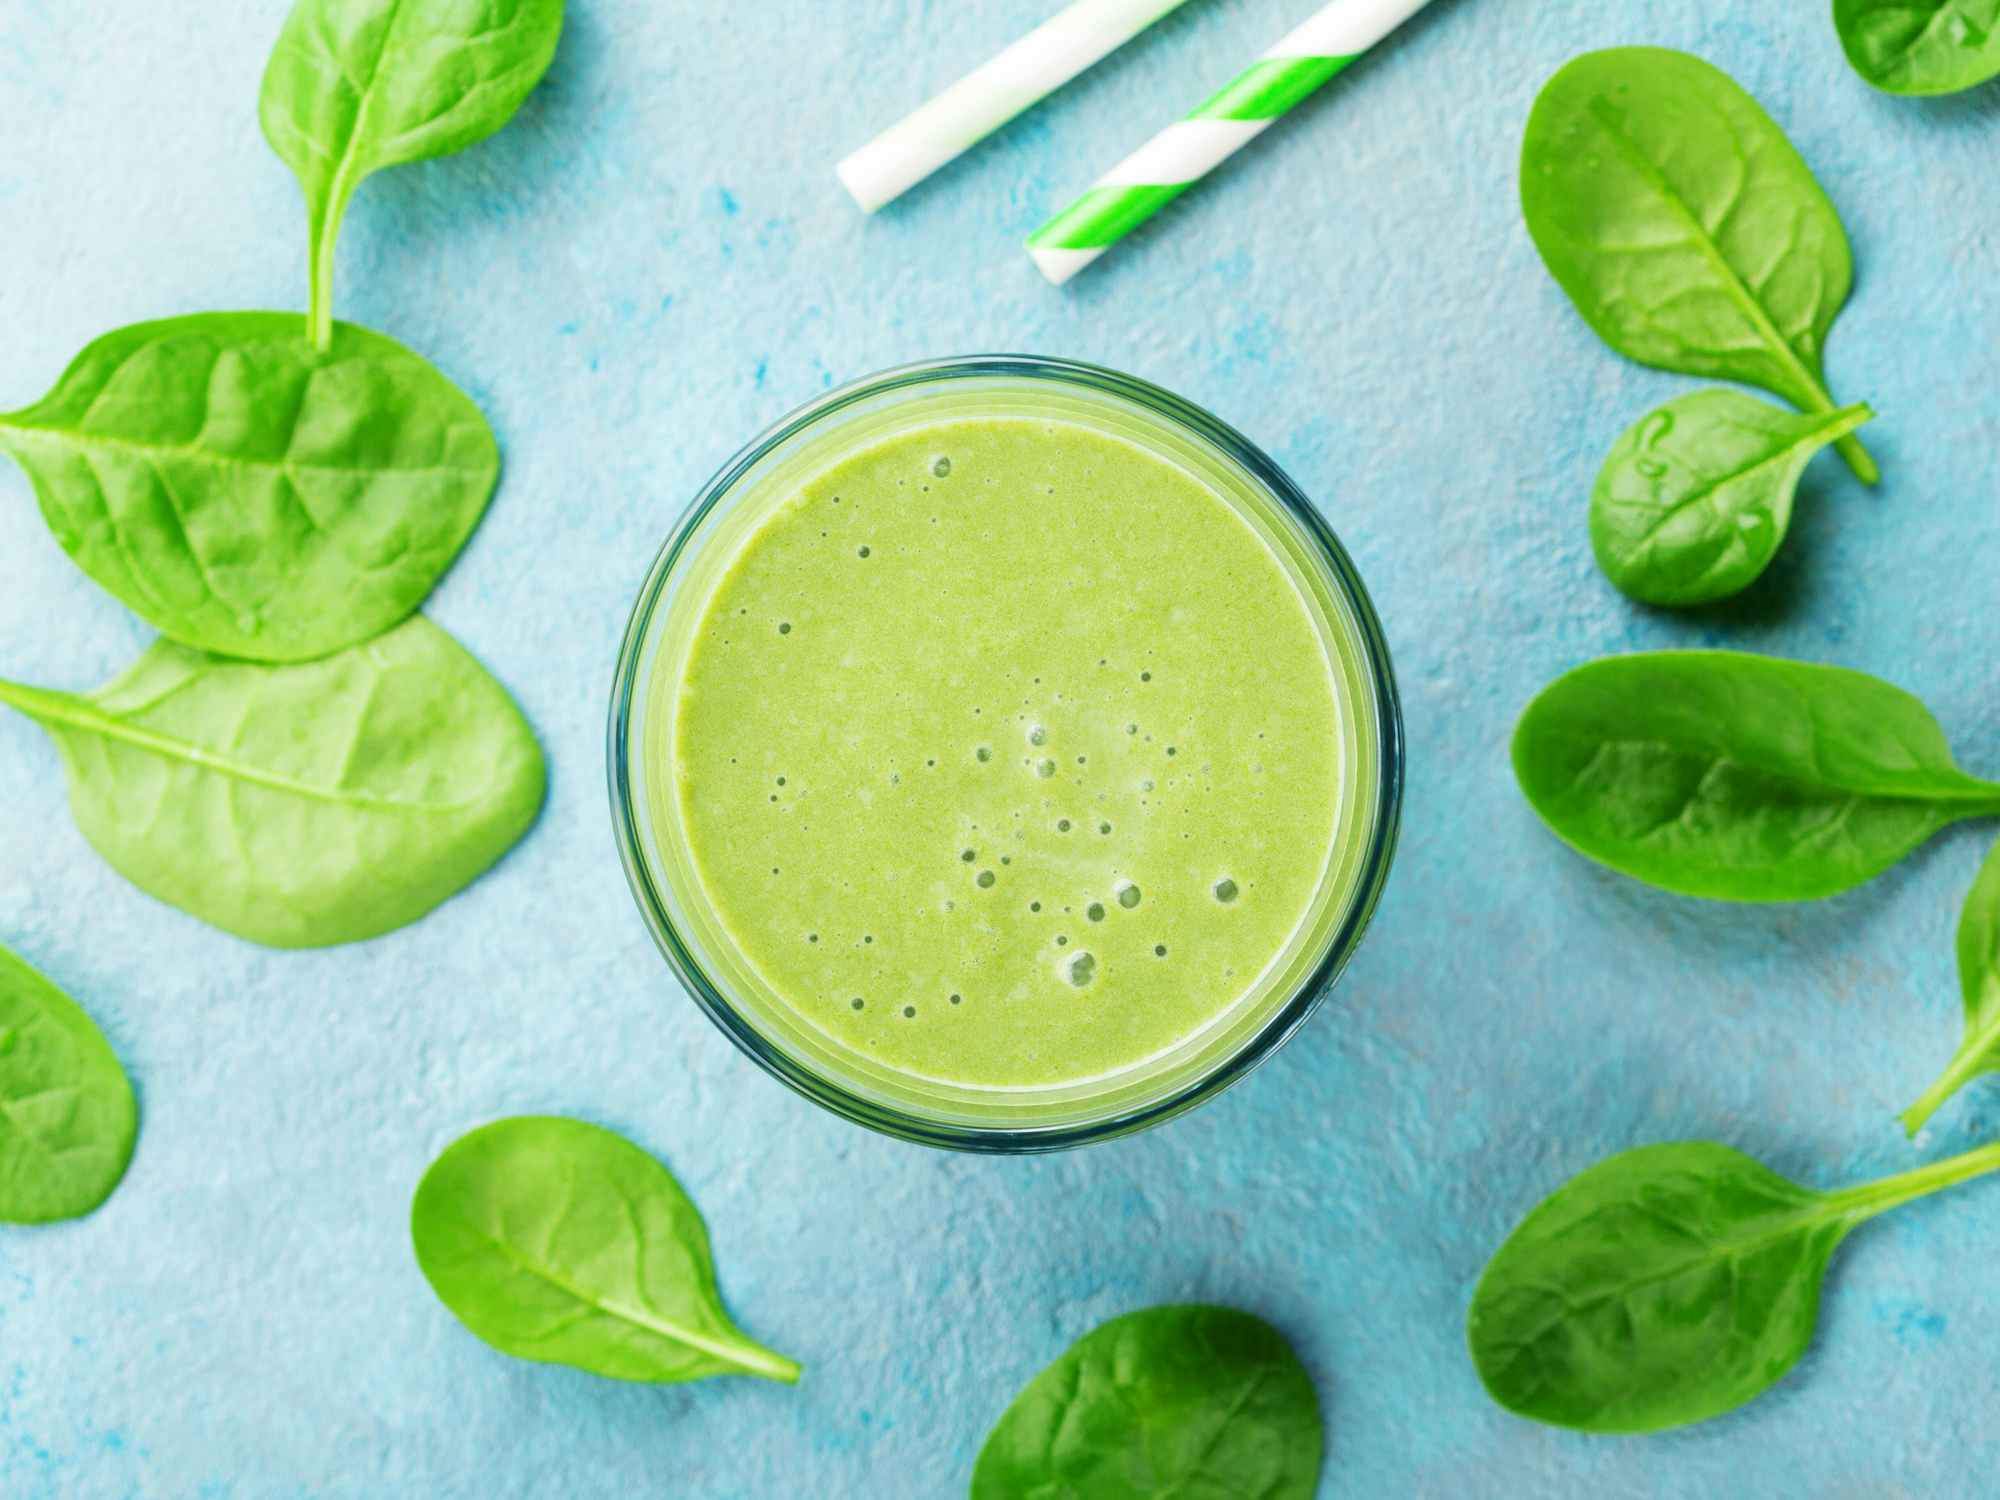 green monster smoothie with baby spinach leaves and straws